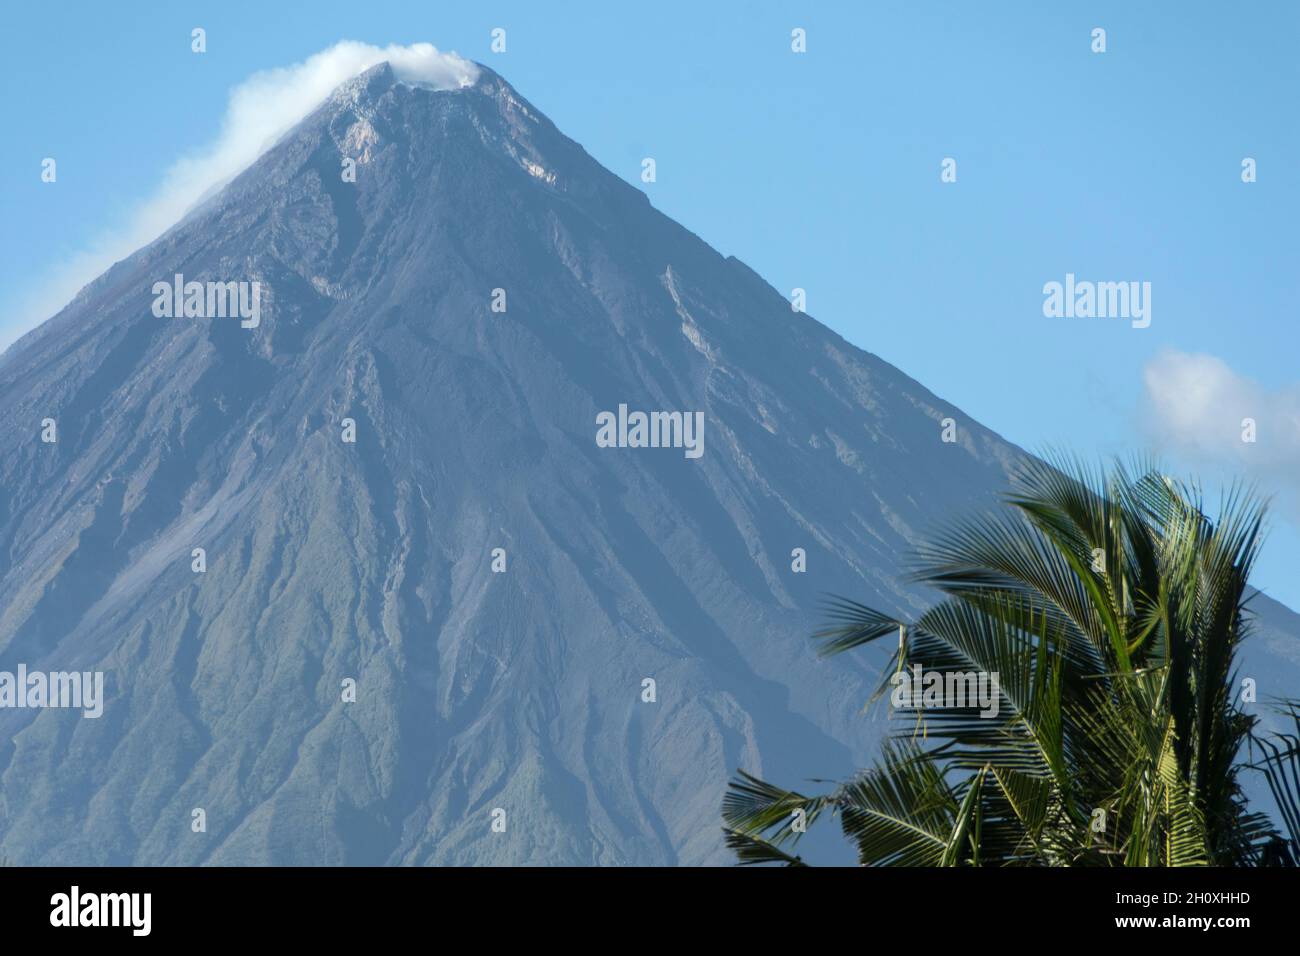 Mount Mayon, the most active stratovolcano of the Philippines. Seen from the city of Legazpi, Albay Province,  Bicol Region, Luzon island Stock Photo